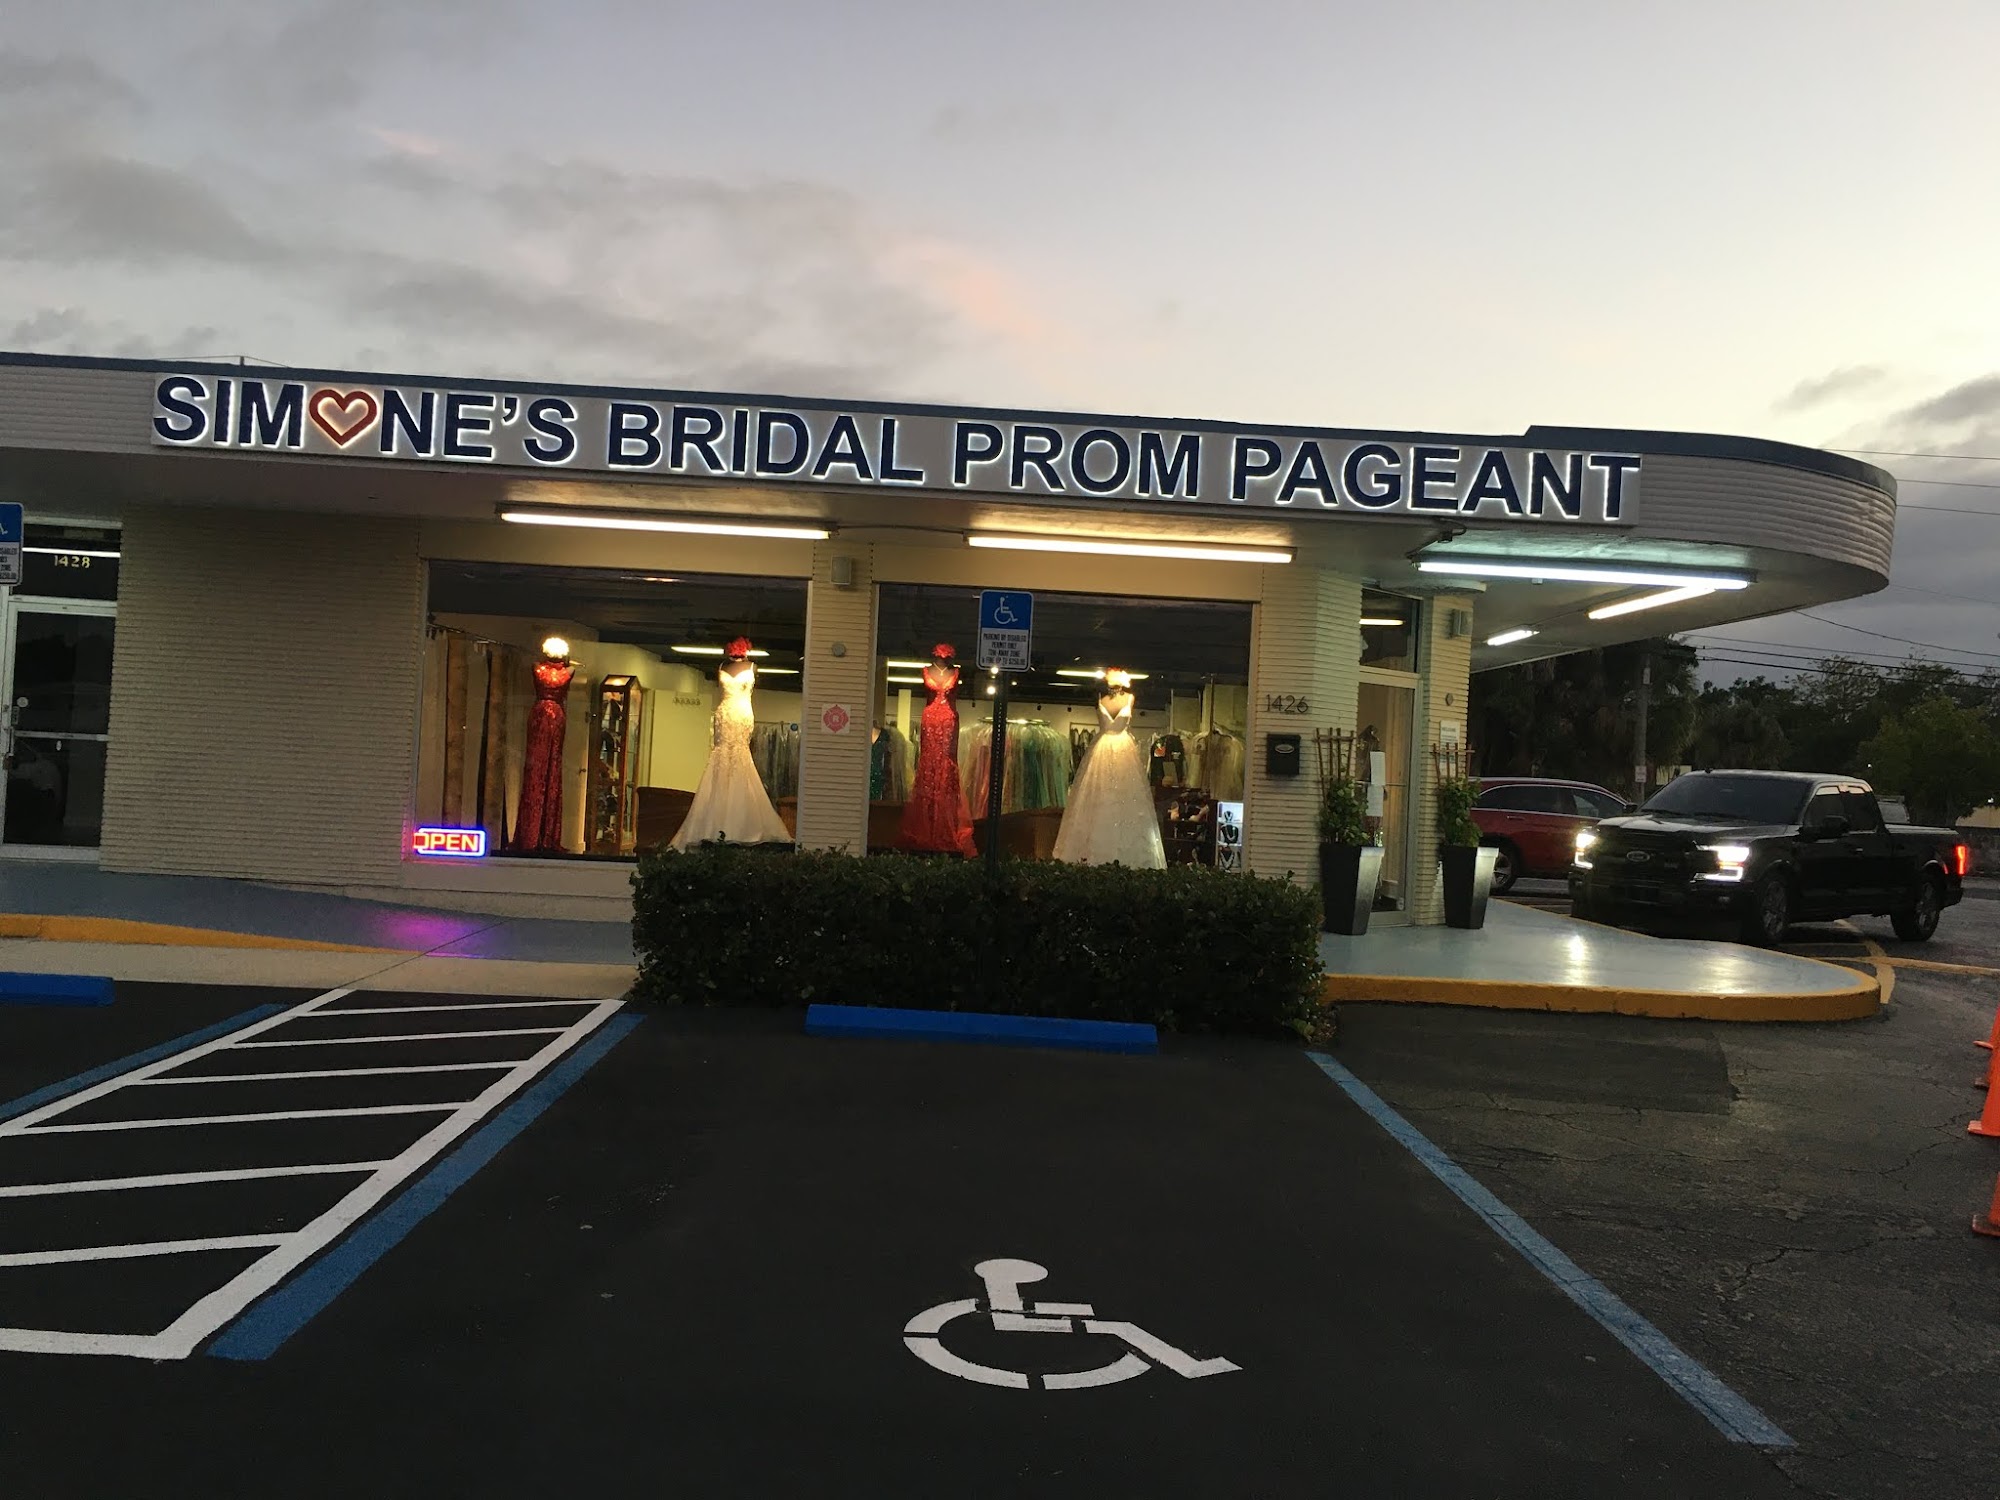 Simone's Bridal Prom Pageant